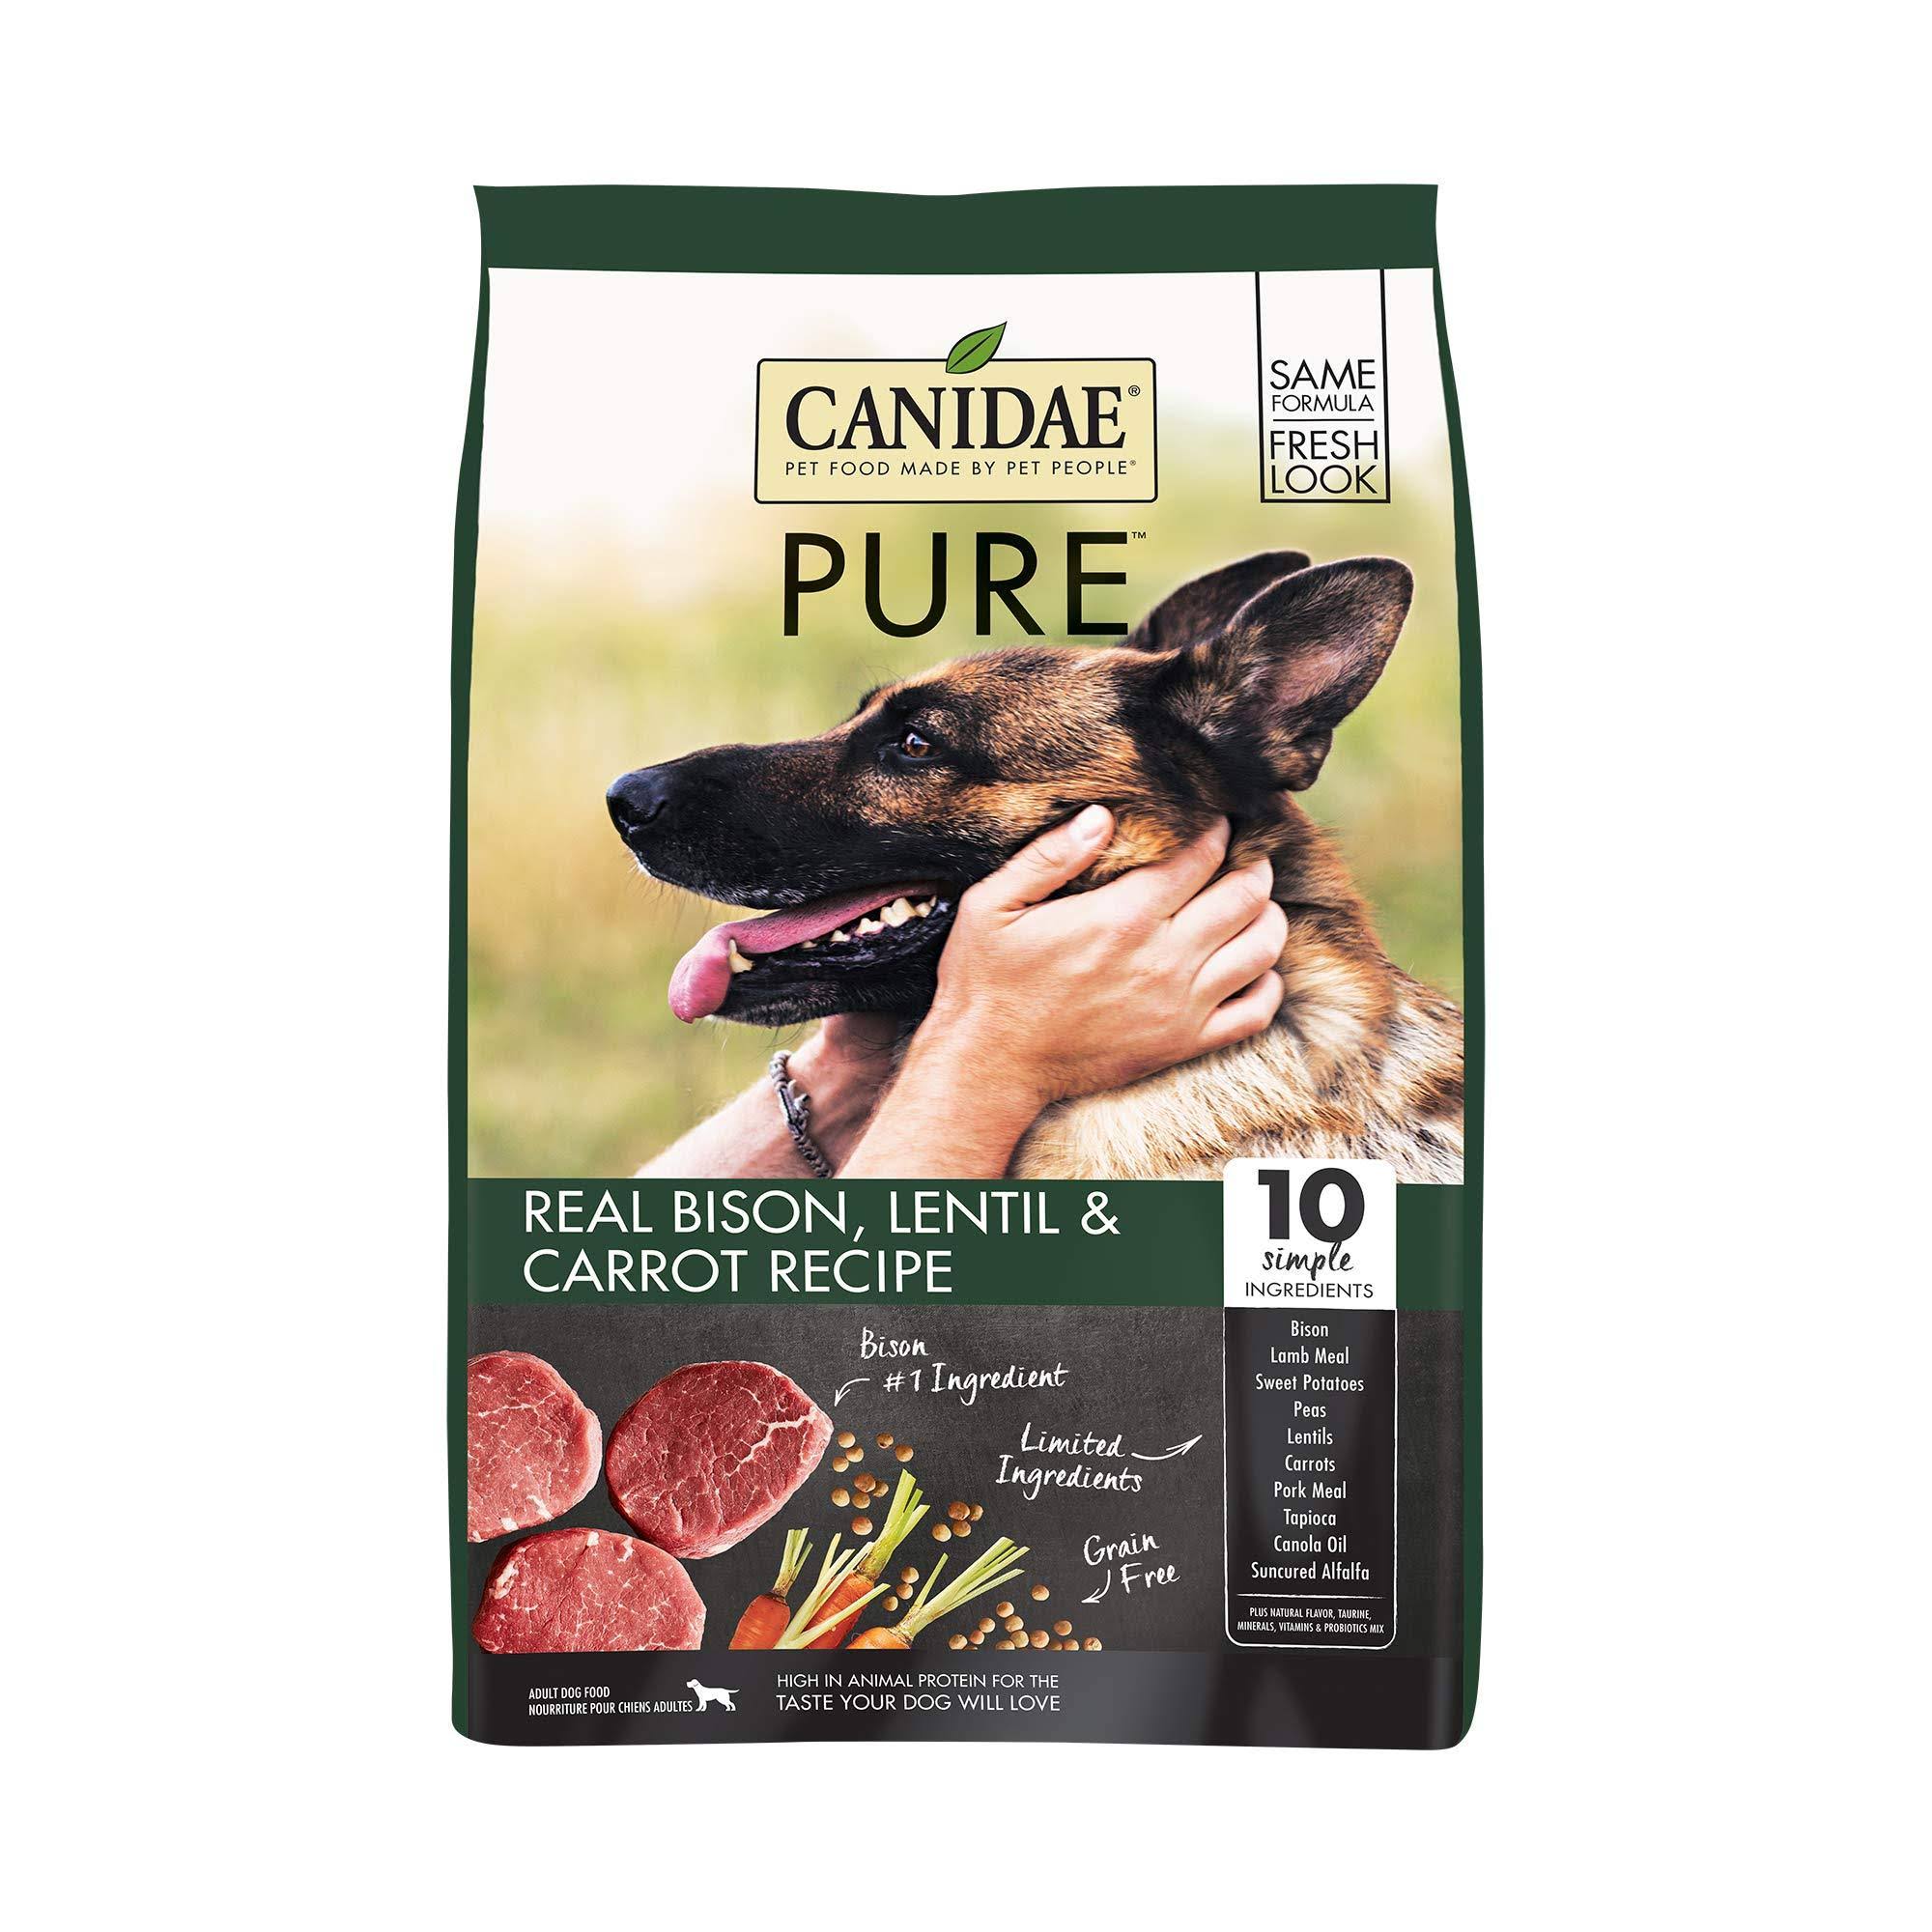 Canidae Grain Free Pure Bison Lentil Carrot Dry Dog Food, 4 lb